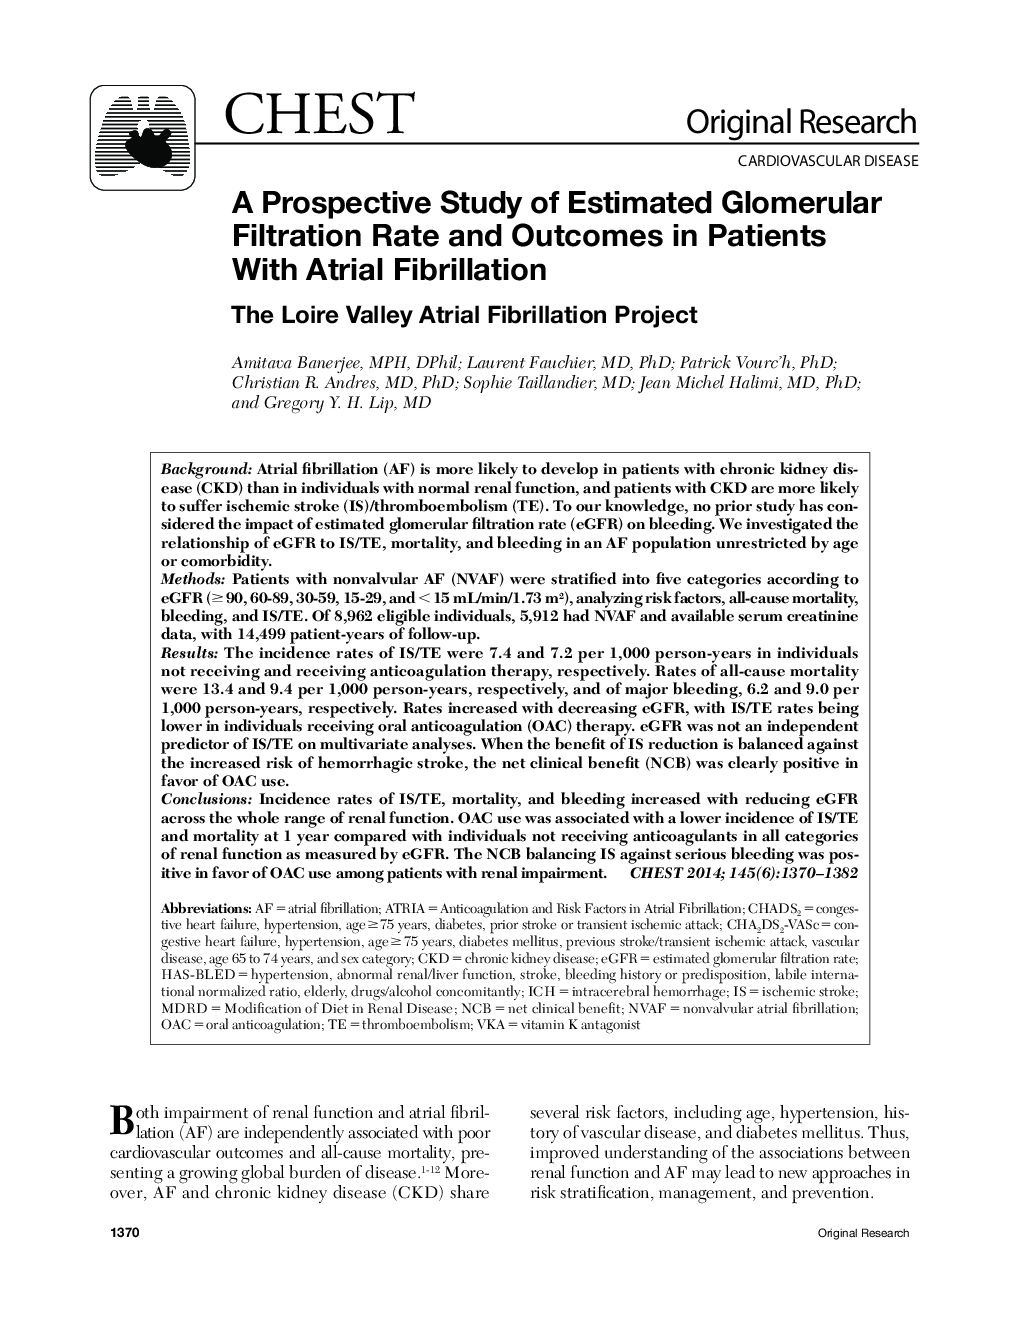 A Prospective Study of Estimated Glomerular Filtration Rate and Outcomes in Patients With Atrial Fibrillation